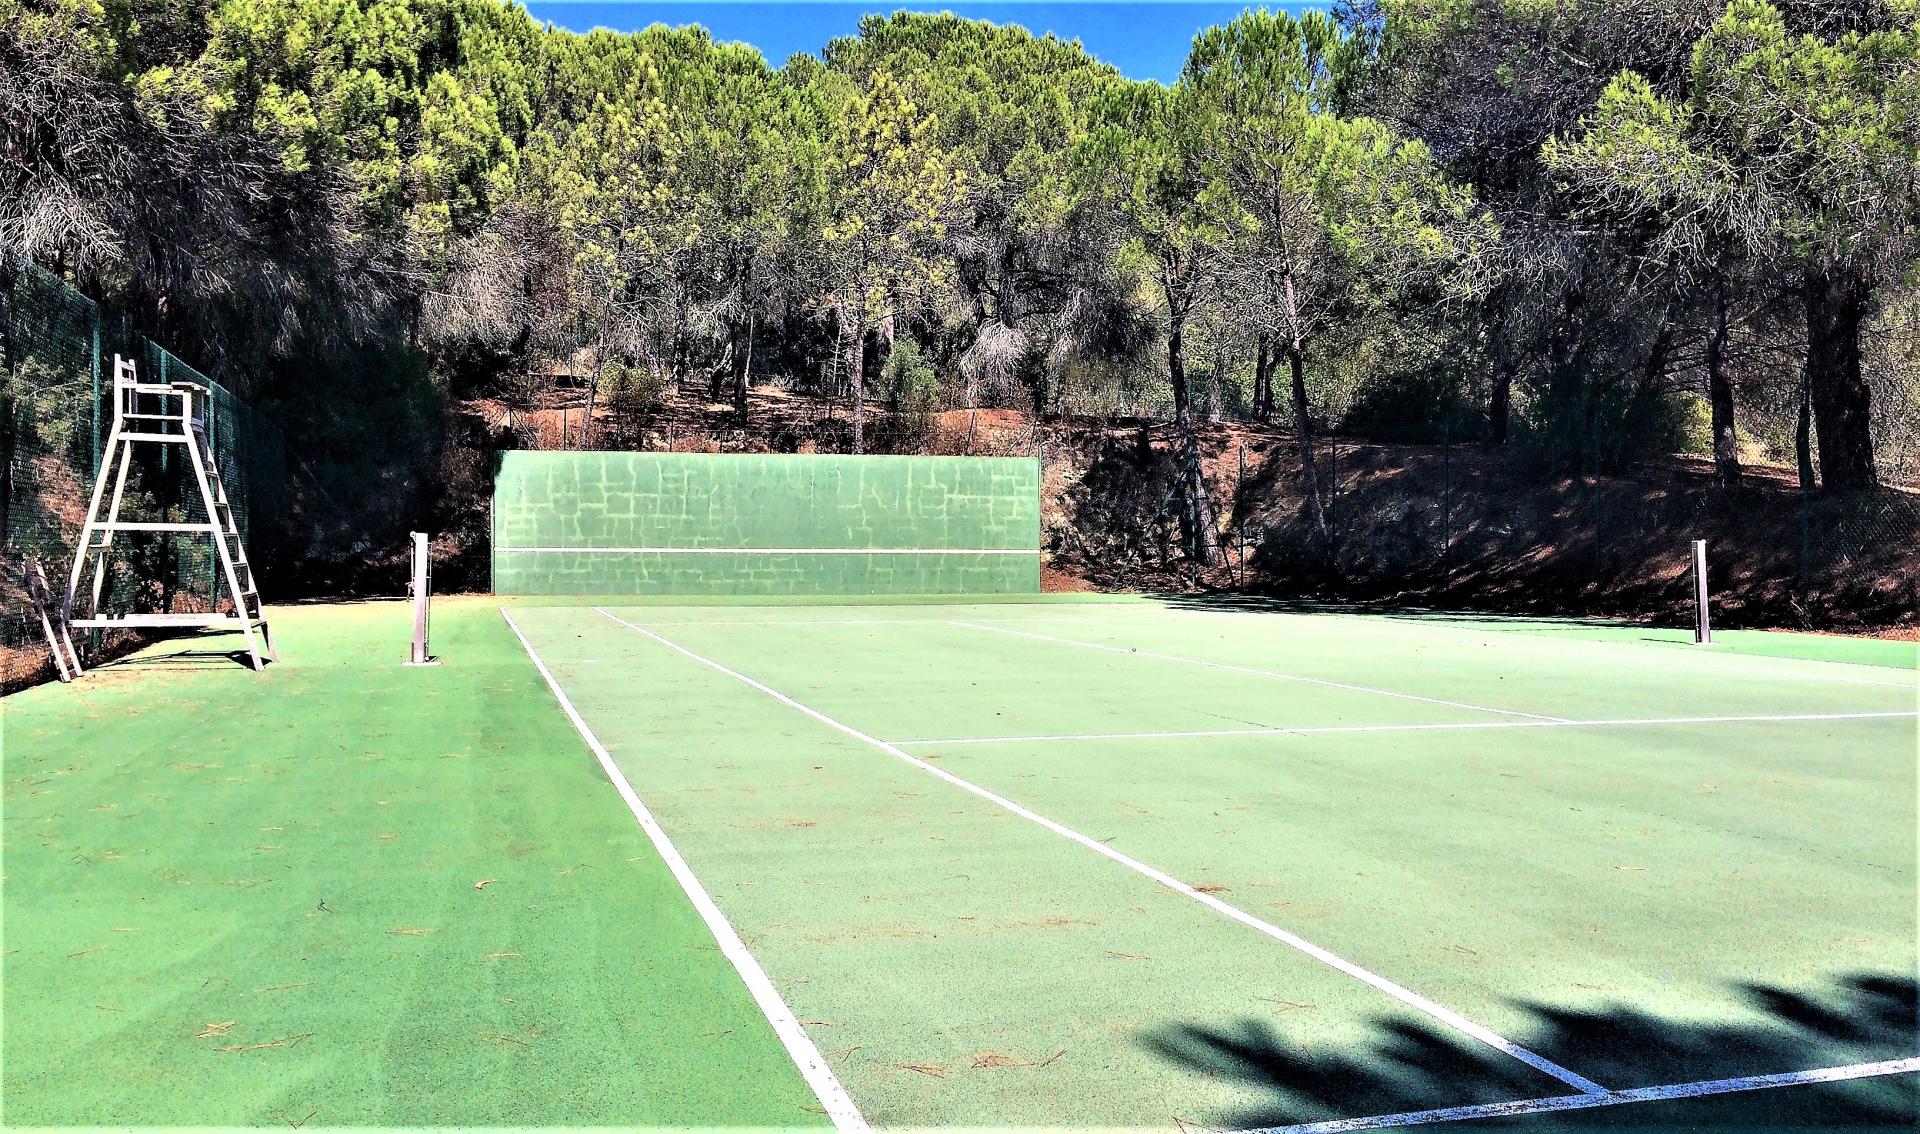 FOR THOSE WHO LIKE PLAYING TENNIS, A TENNIS COURT RIGHT IN THE MIDDLE OF THE PINES